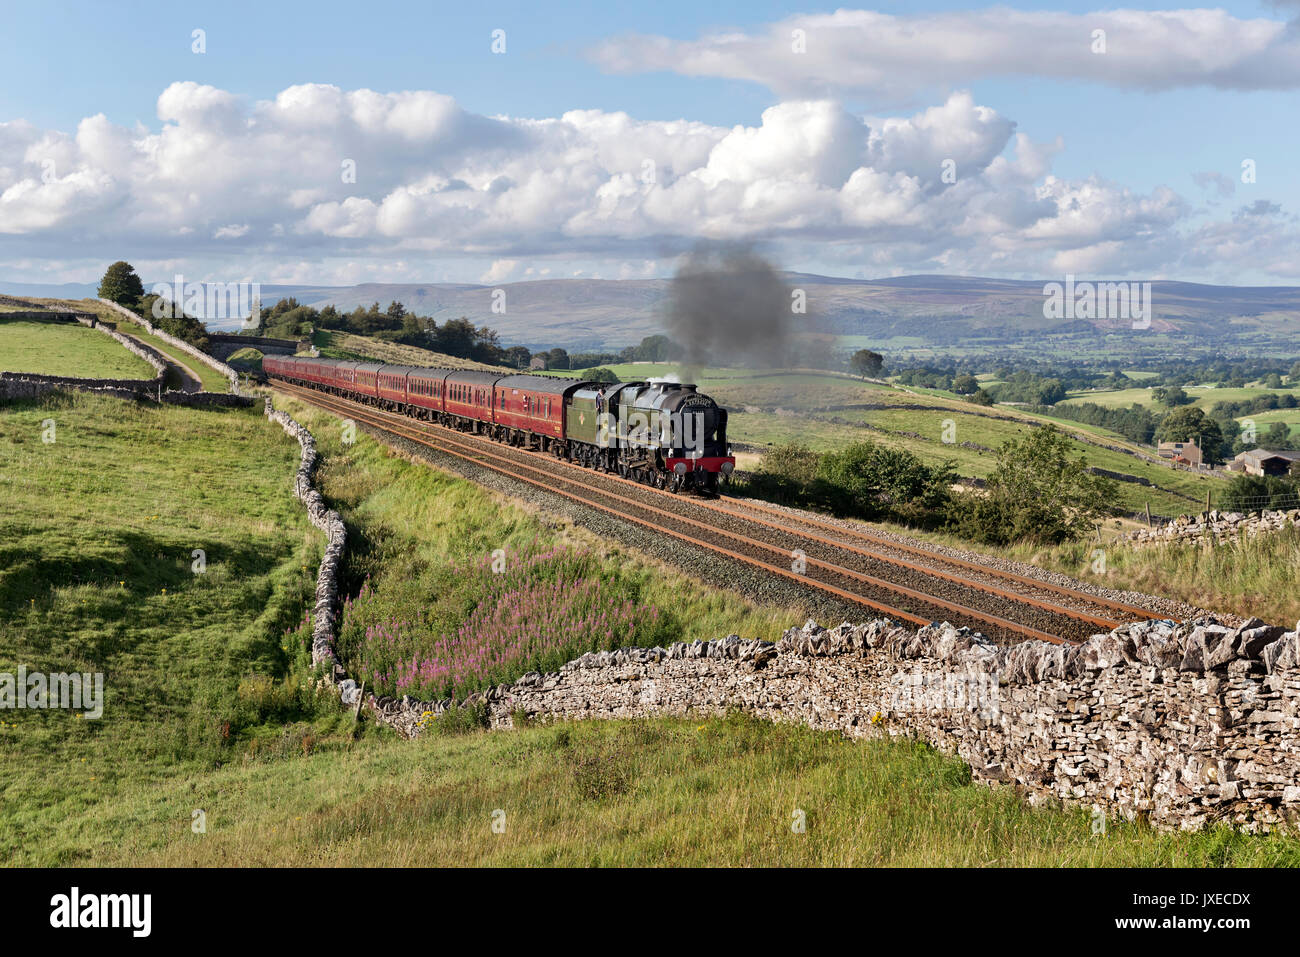 Kirkby Stephen, Cumbria, UK, 15th August 2017. Steam locomotive Scots Guardsman hauls 'The Dalesman' Summer special back from Carlisle on the Settle-Carlisle railway line, seen here at Birkett Common near Kirkby Stephen, Cumbria. Scots Guardsman is due for an overhaul and may not be seen again on the railway network for some time. Significantly the locomotive is seen with a 'Thames-Clyde Express' headboard, which was the name of one of the express train services that ran over this railway line back in the days of steam. Credit: John Bentley/Alamy Live News Stock Photo